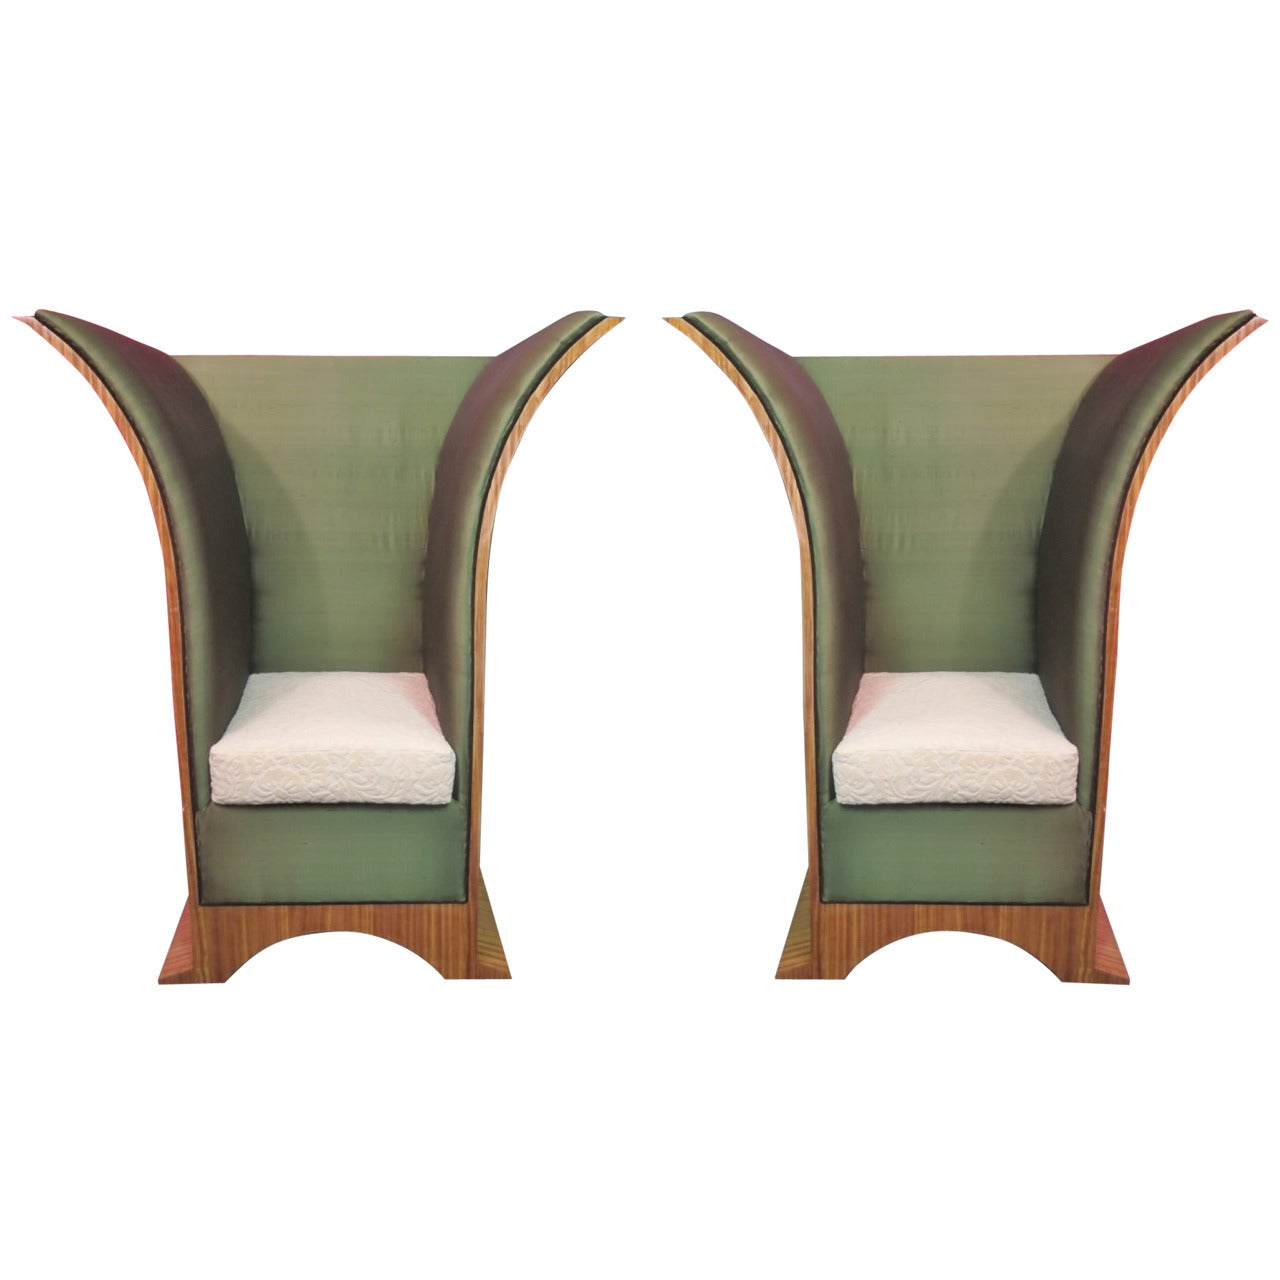 Pair of Art Deco Citronè Wood Silk and Damask Velvet French Armchairs, 1940